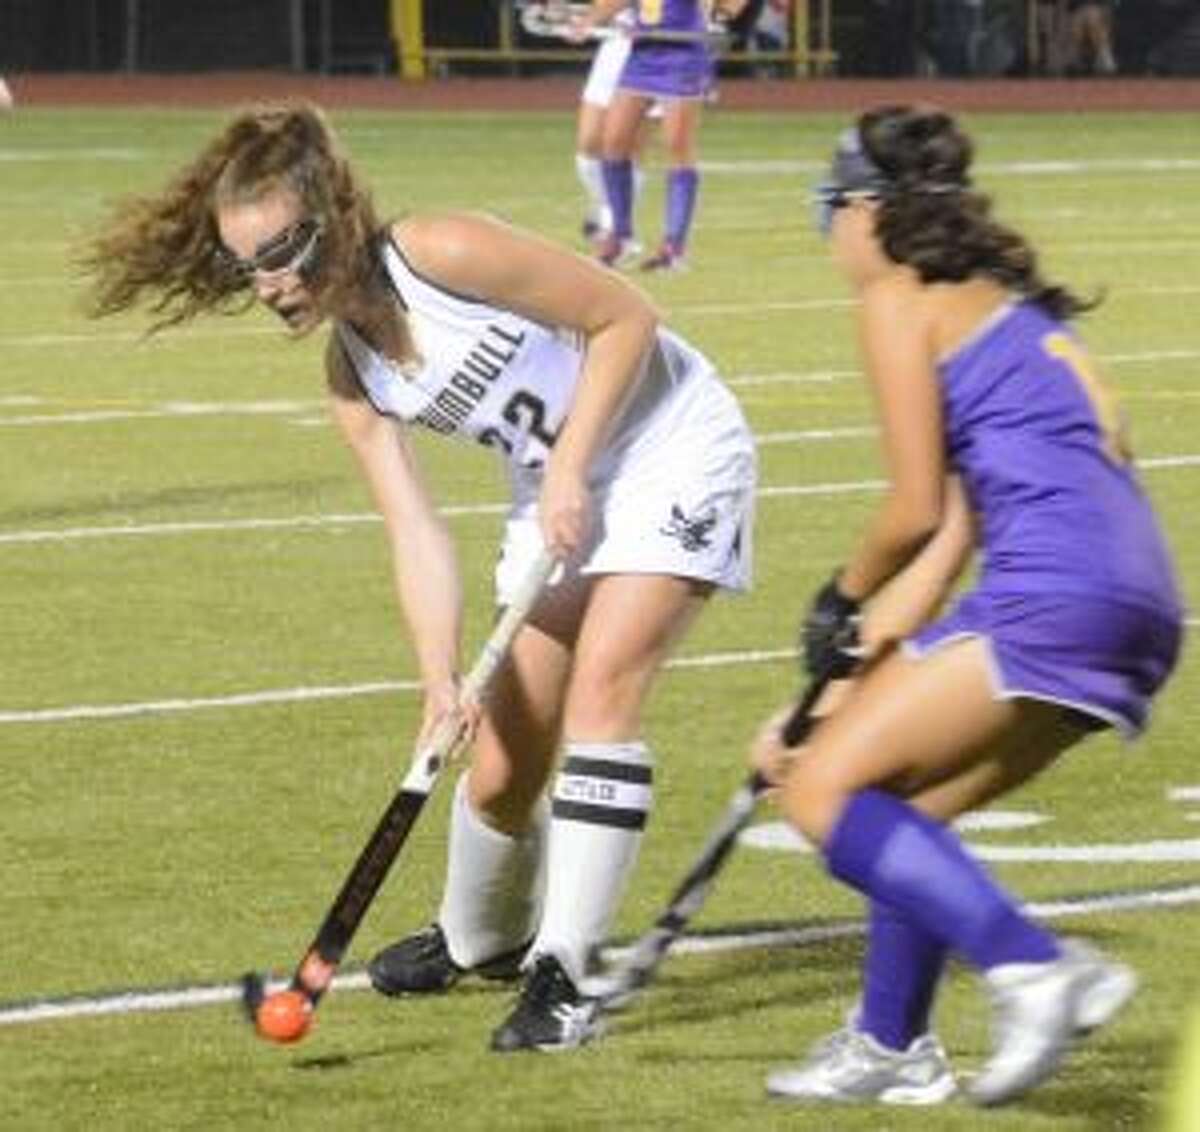 Trumbull High's Mimi Leonard looks to advance the ball. — Andy Hutchison photo